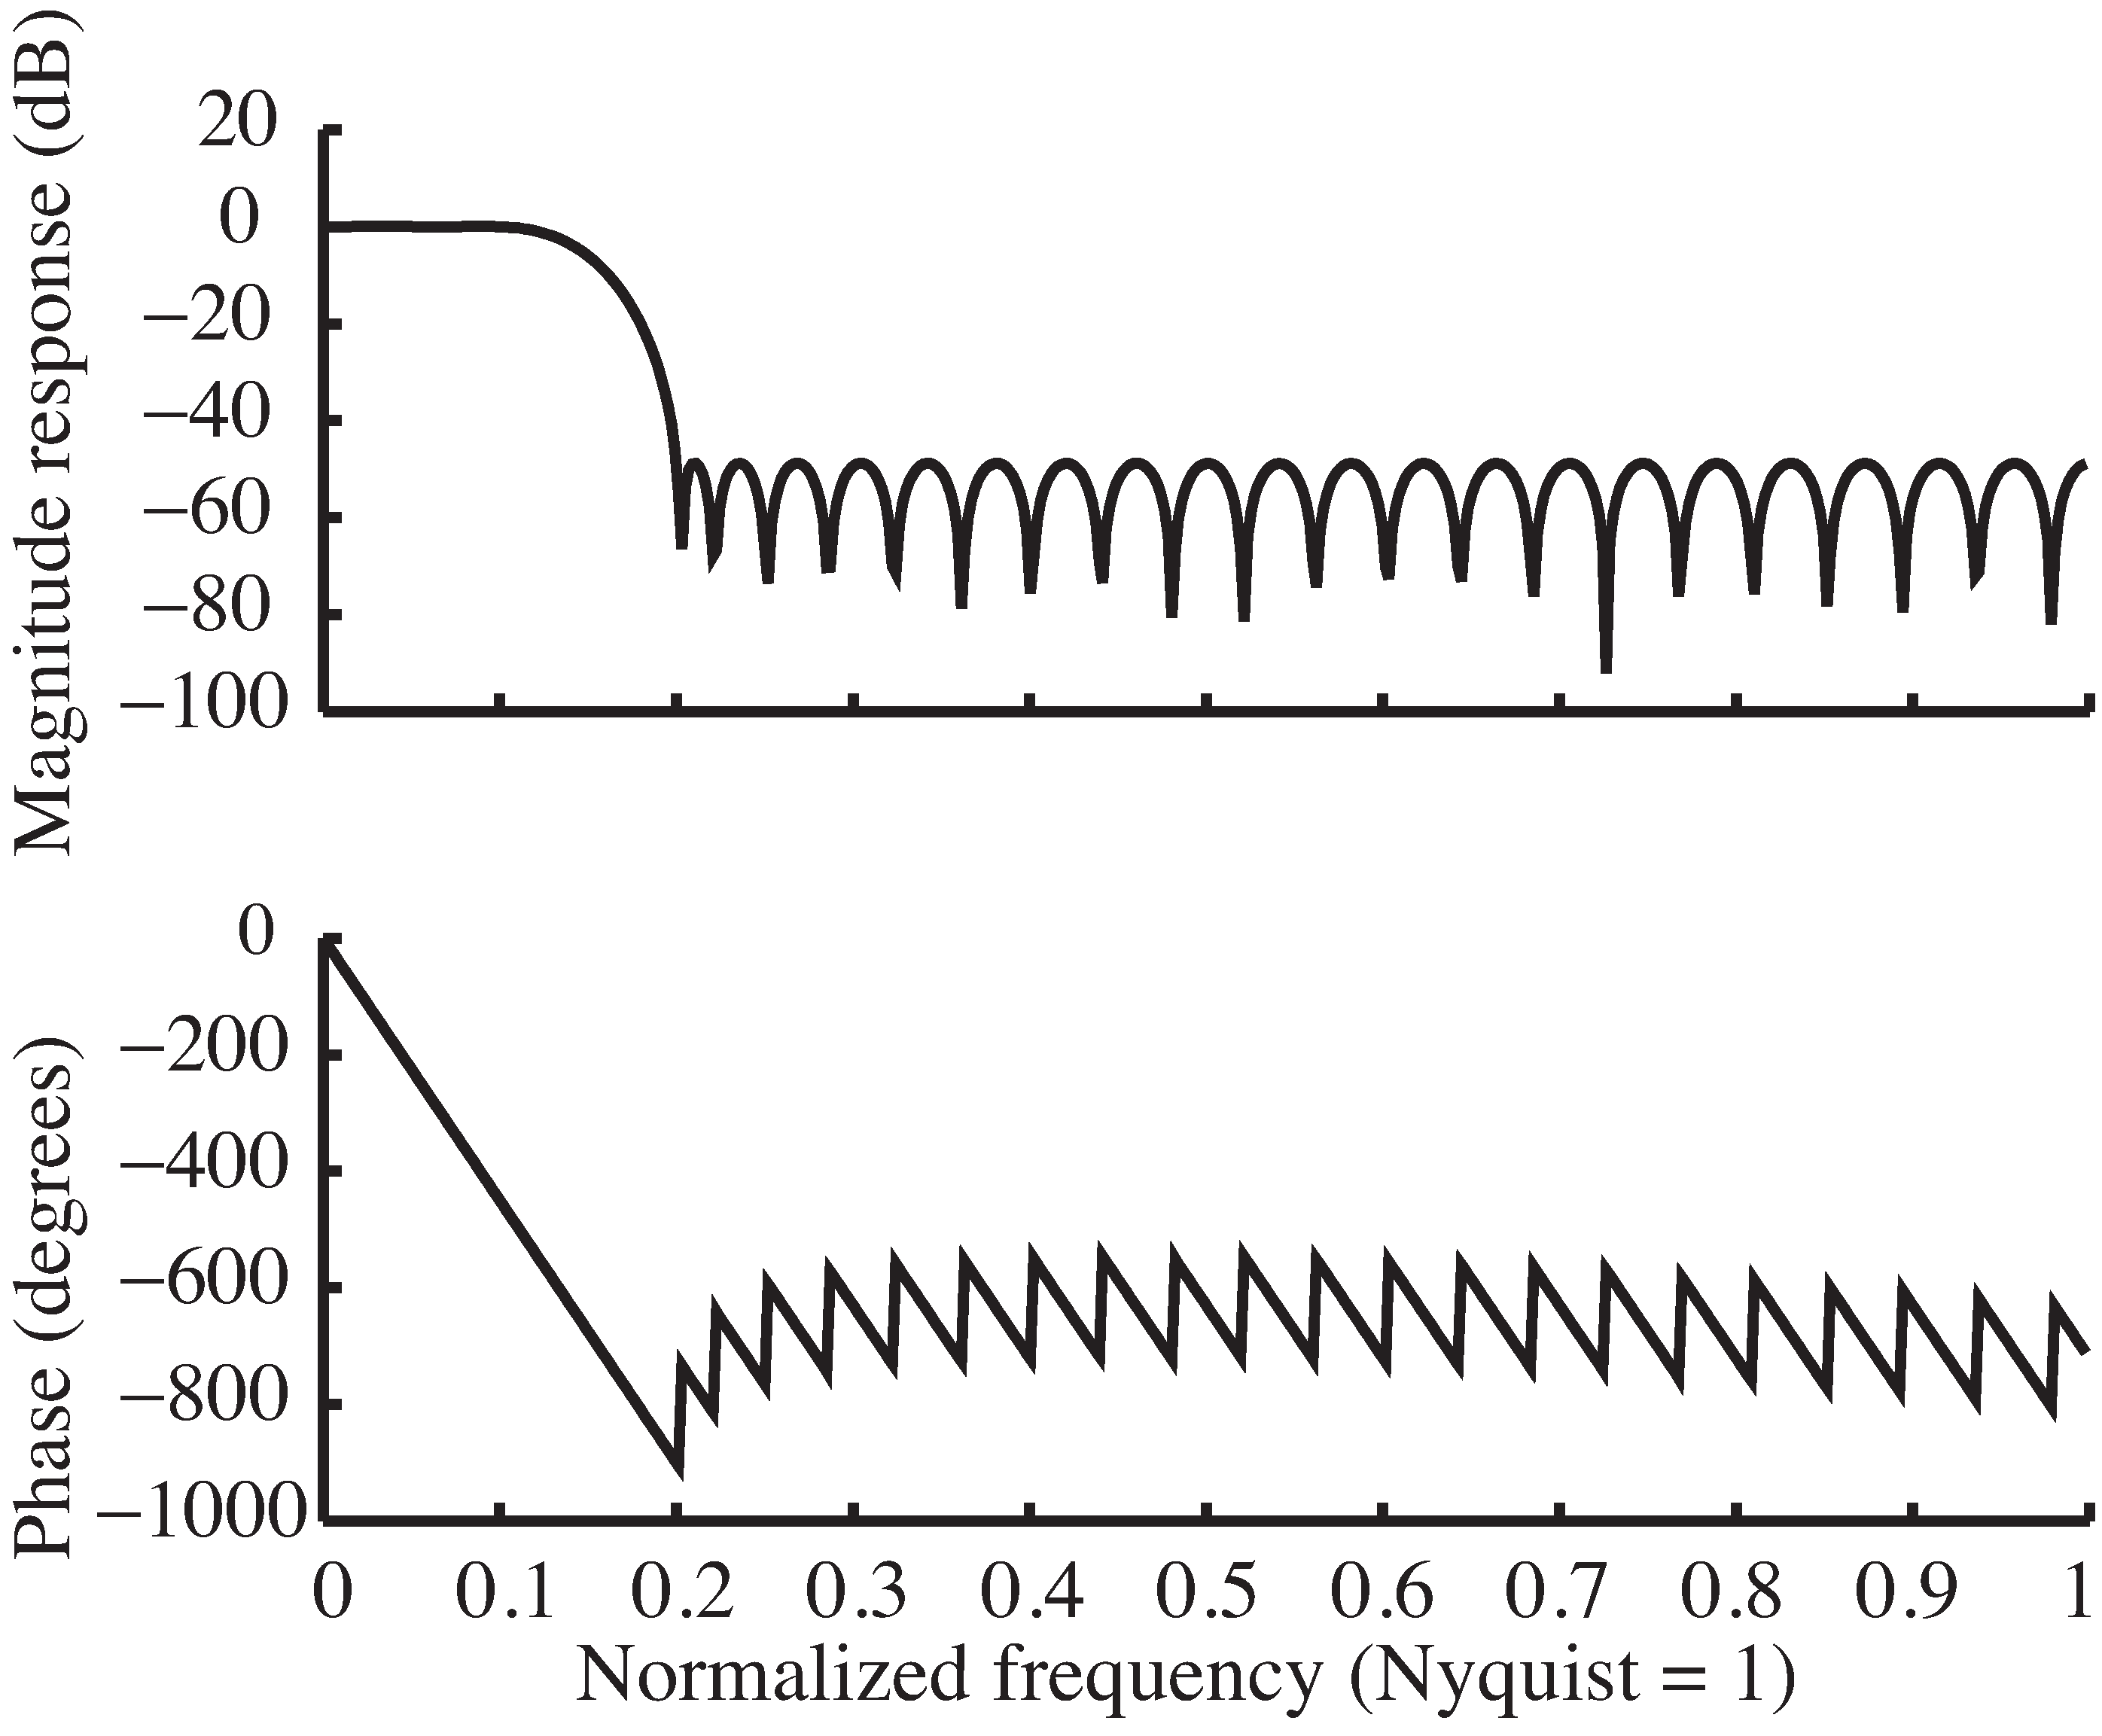 The frequency response of the lowpass filter designed using firpm  in idsys.m .